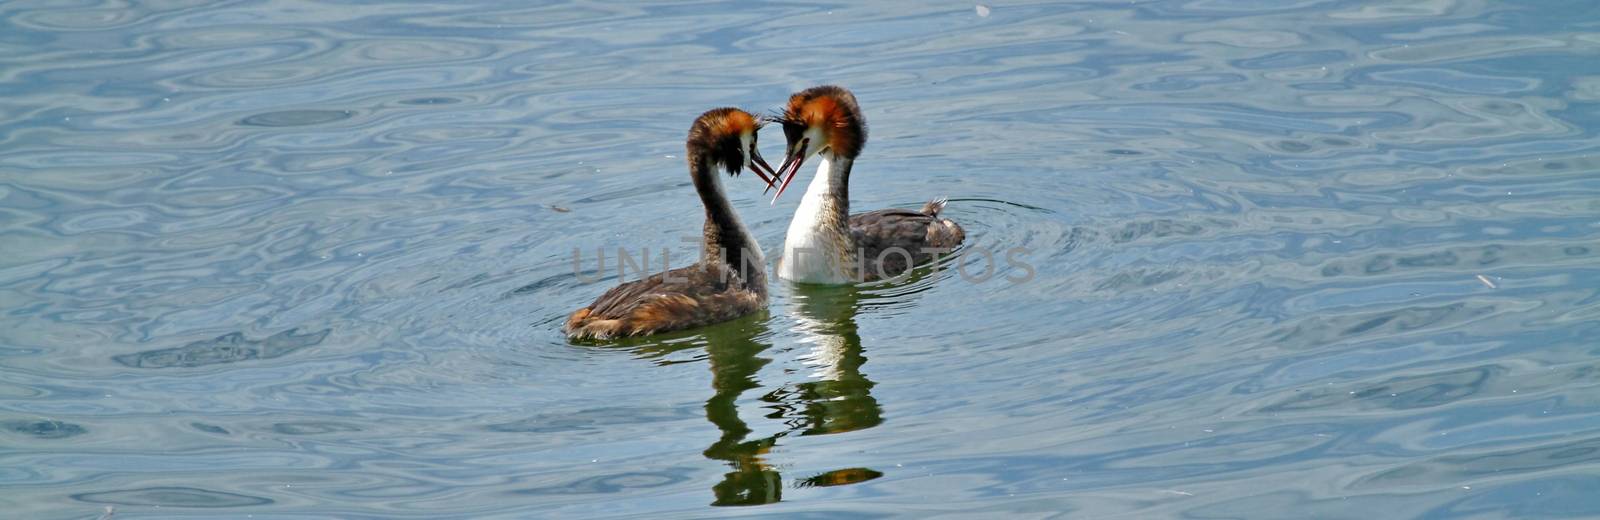 Great Crested Grebe and lake